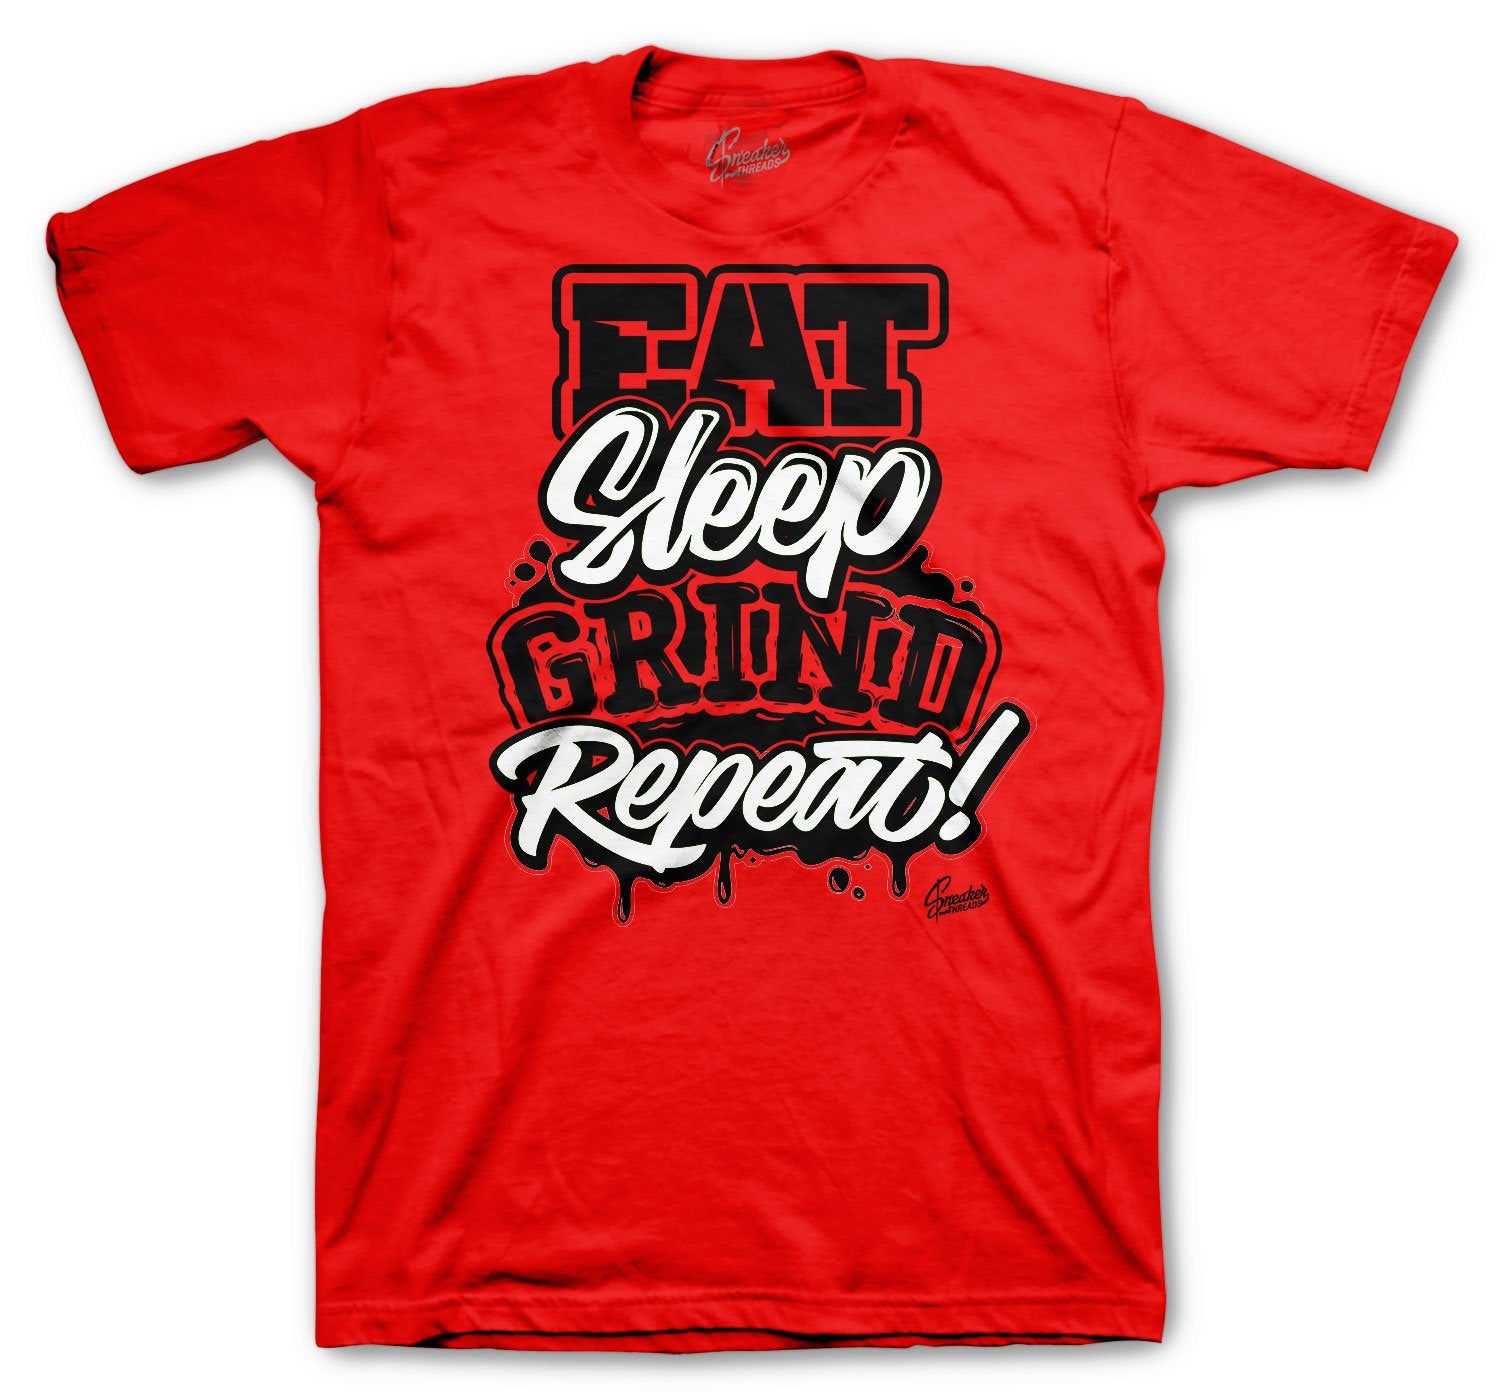 shirts for the bred 11s